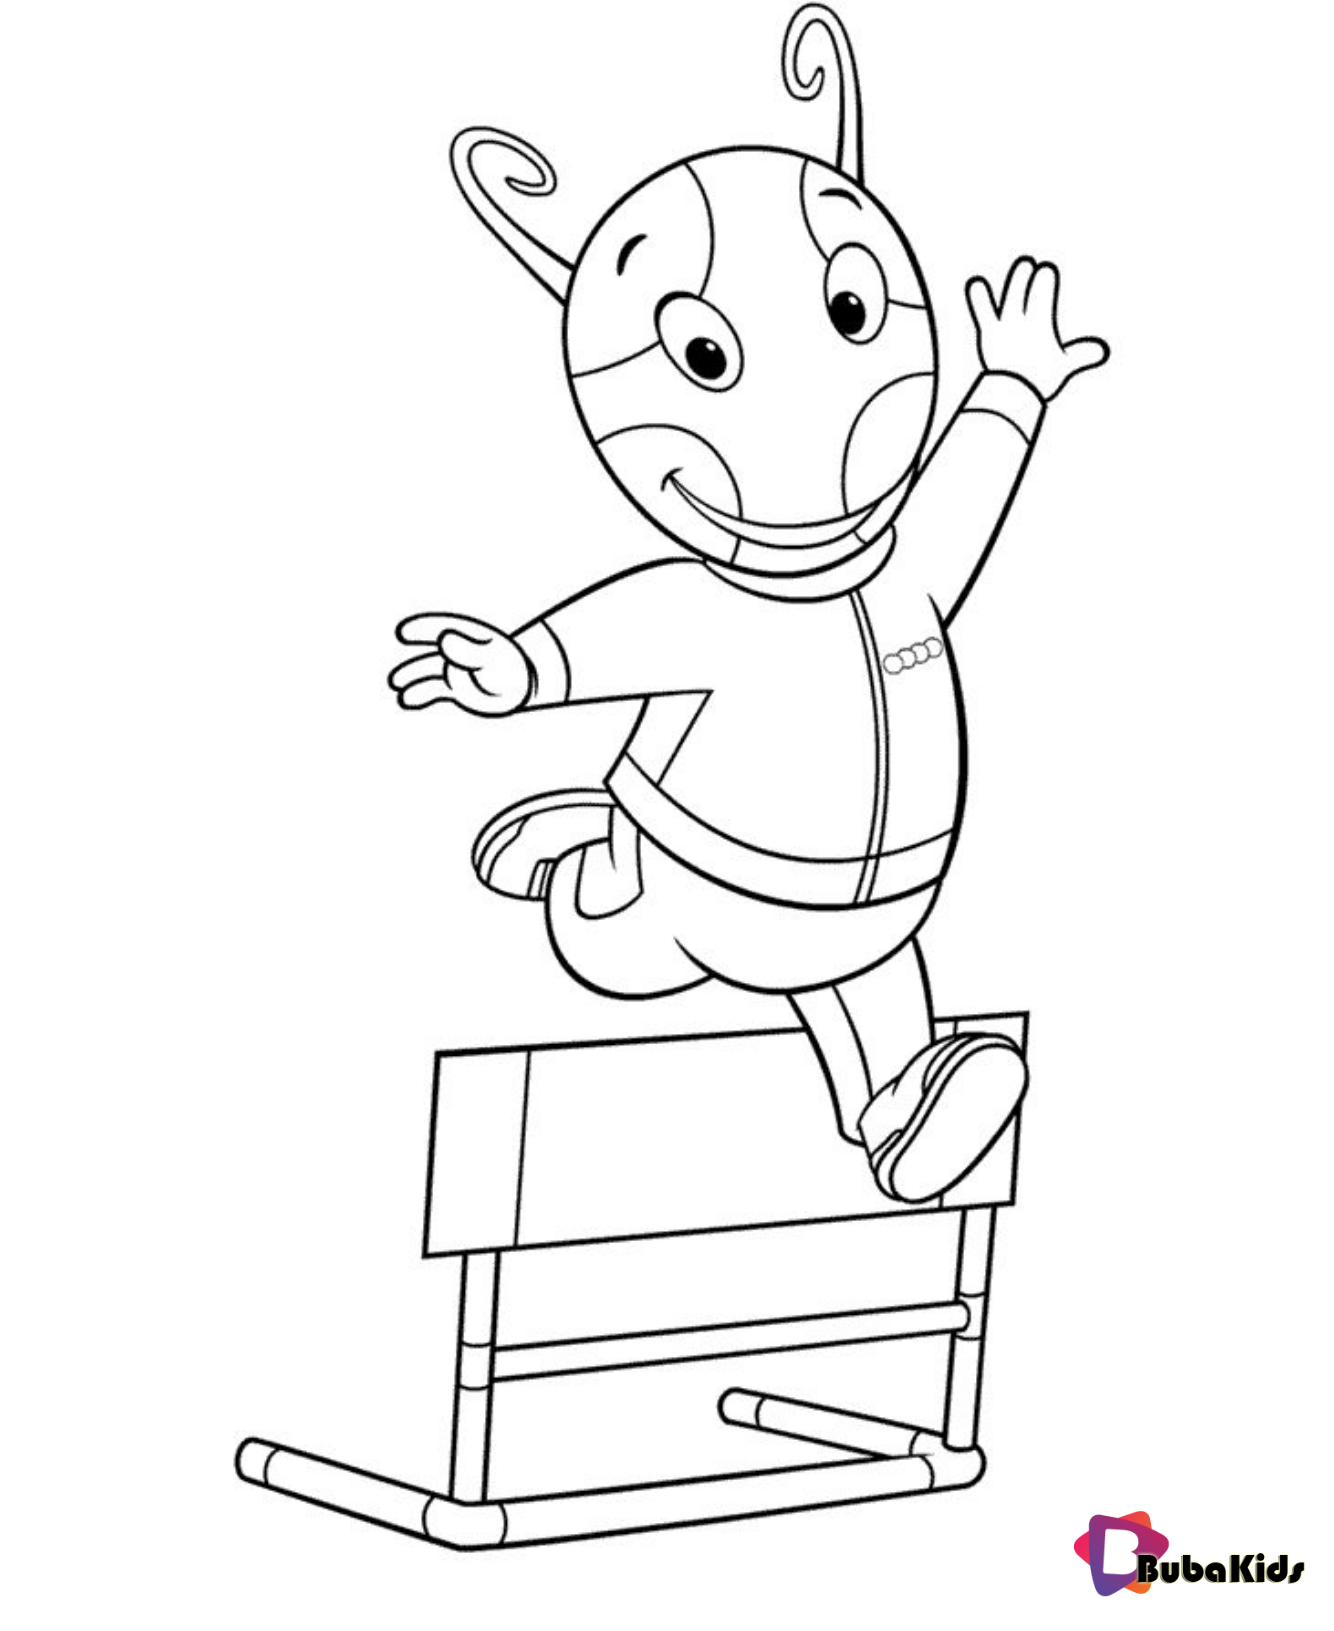 Backyardigans Coloring Pages for kids free